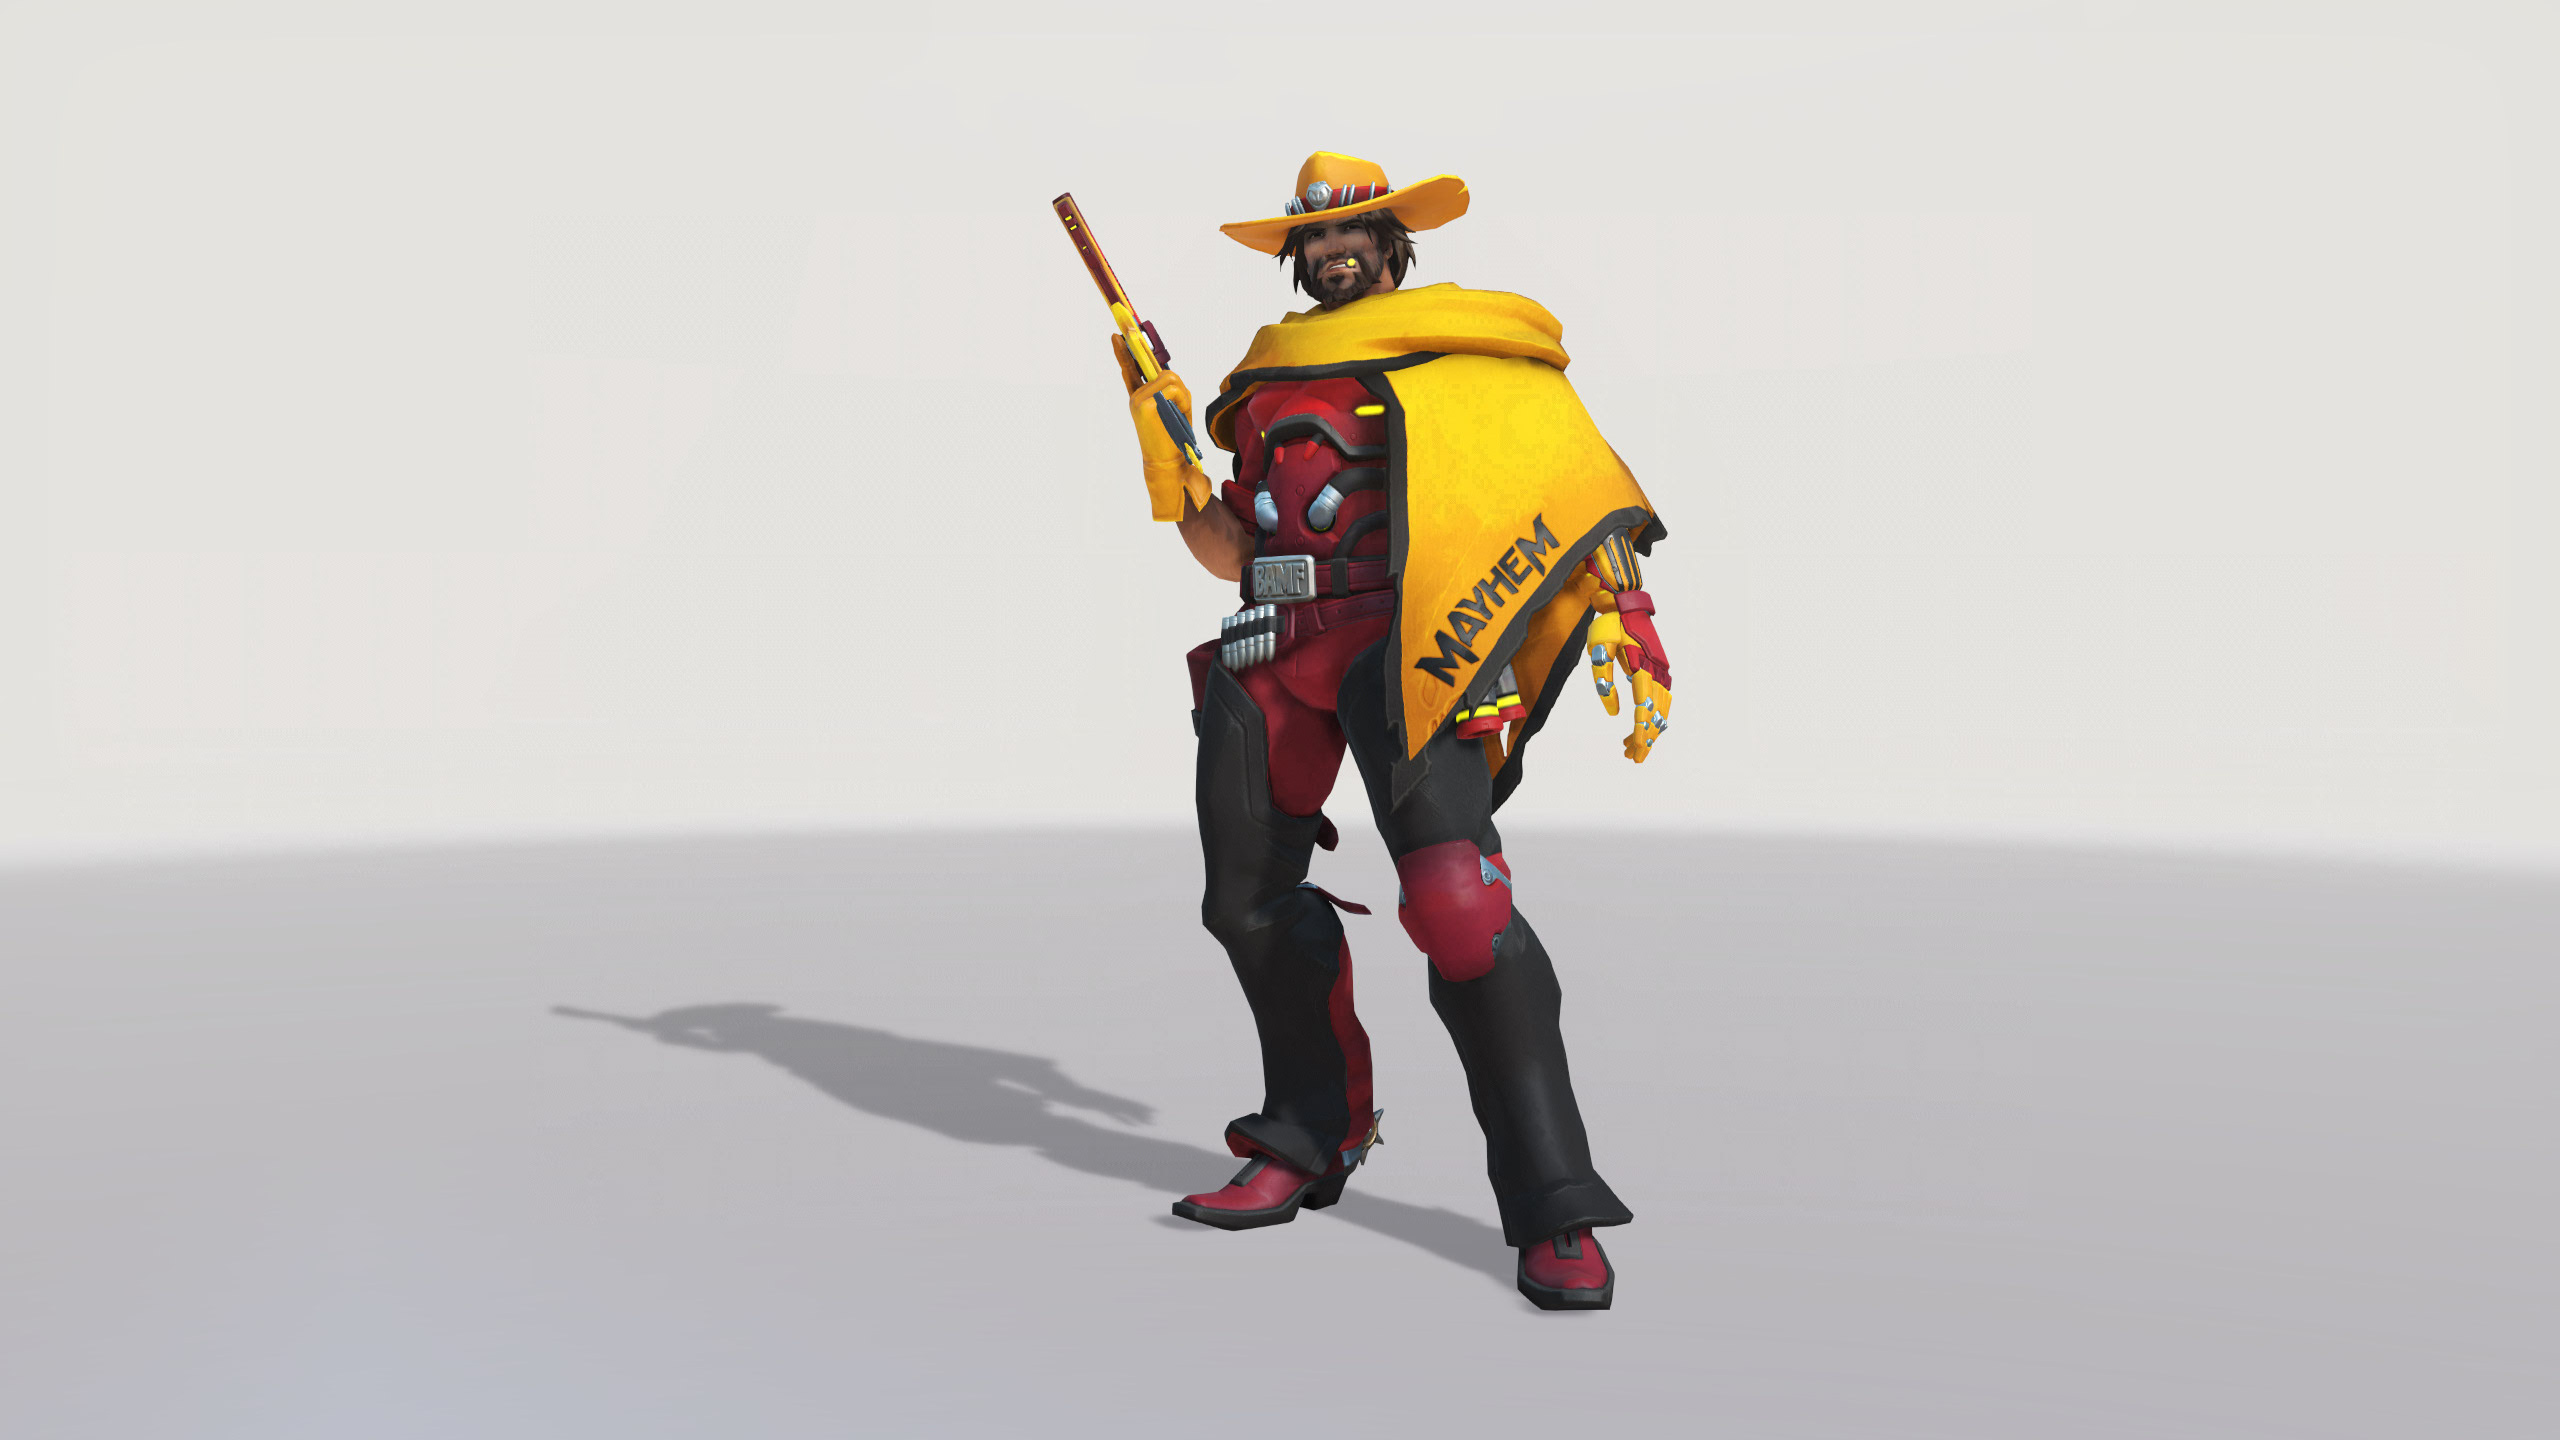 Every Overwatch League Skin: Here's All The Team Skin And How To